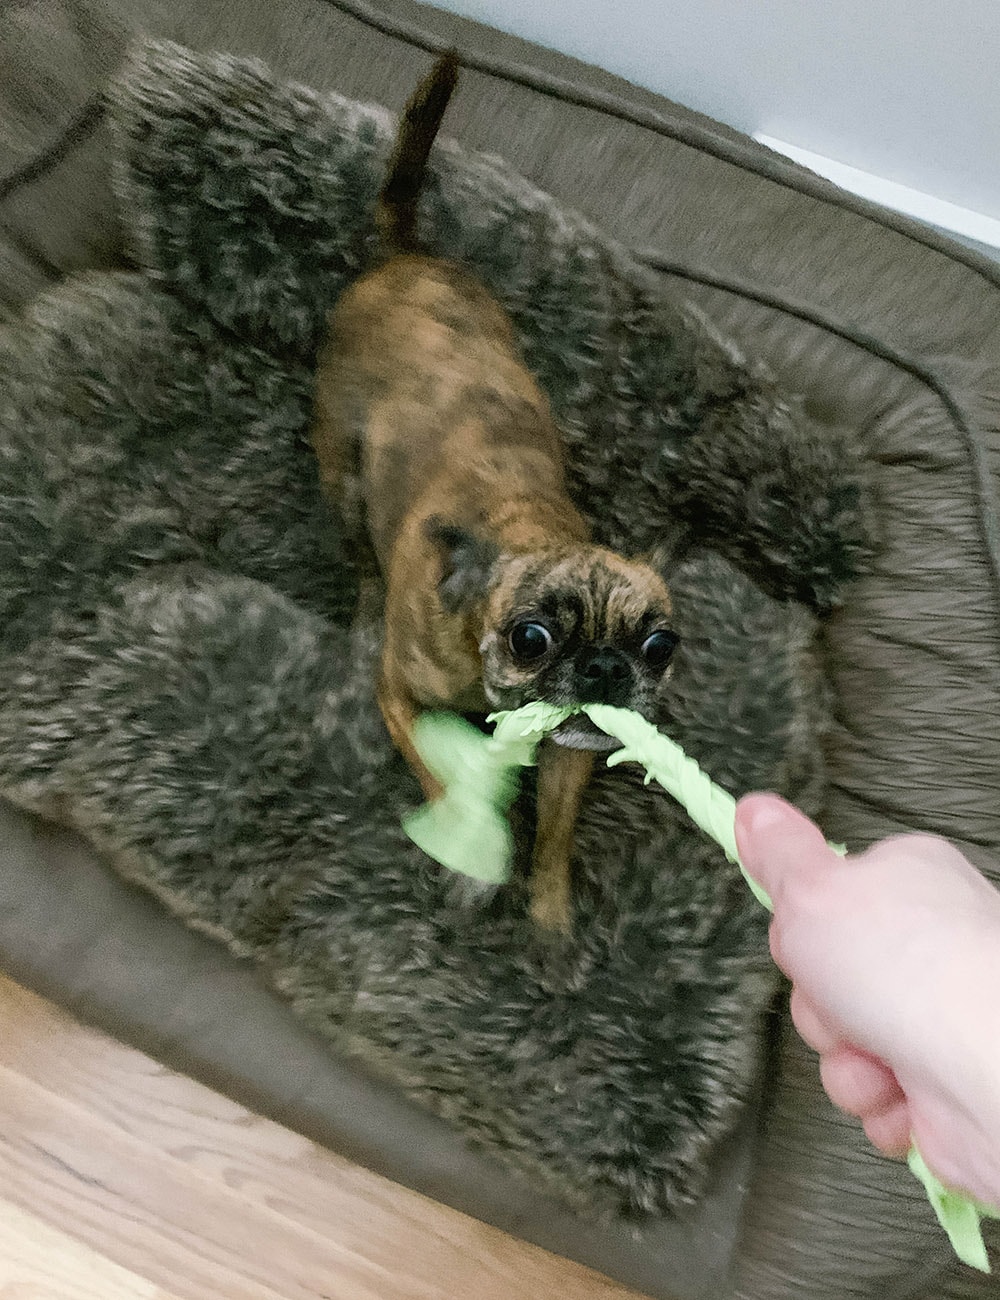 Small dog playing with tug toy.